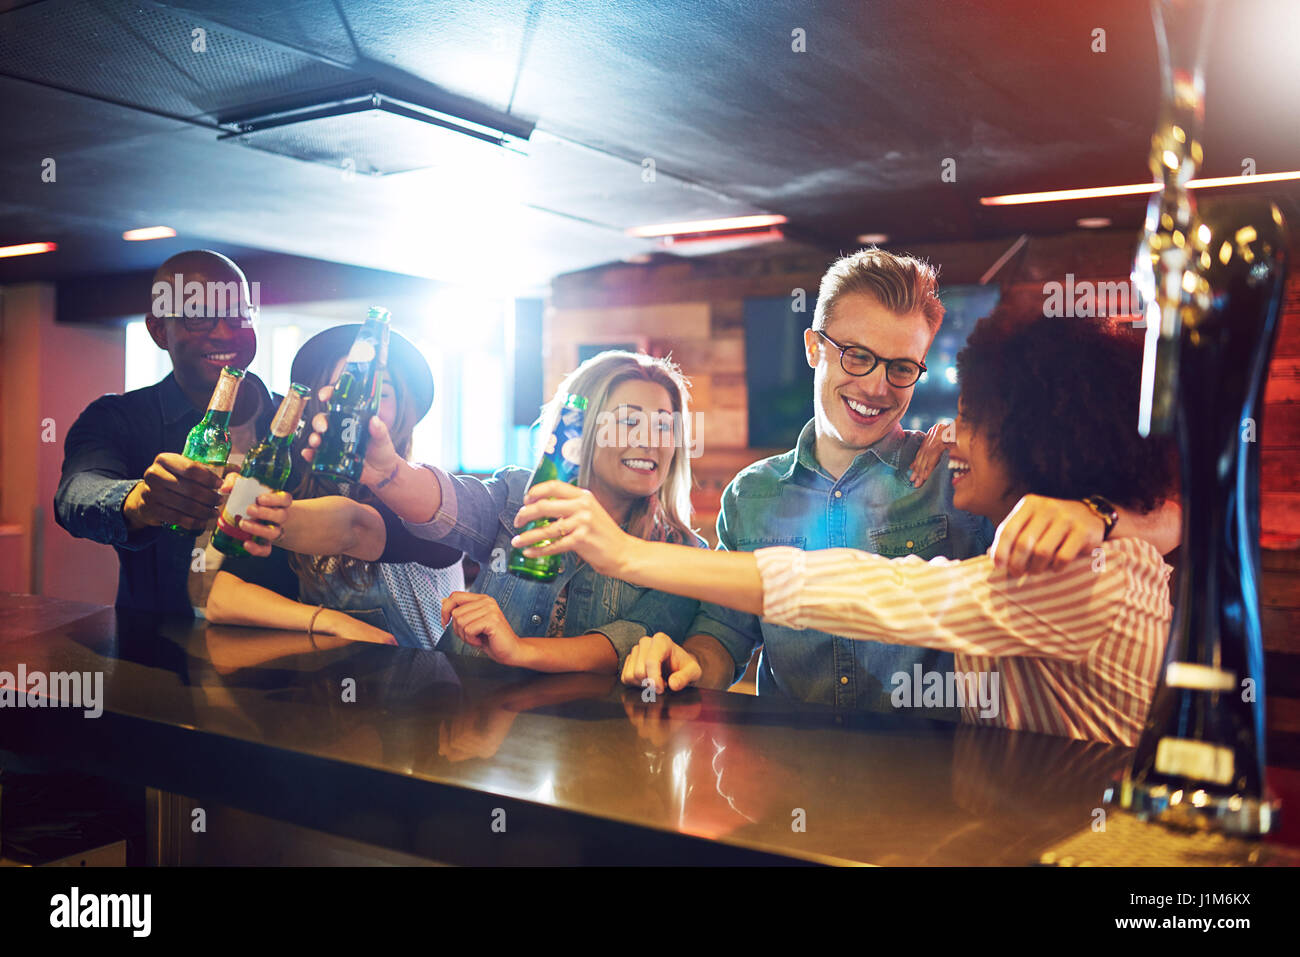 Horizontal shot of people with beer showing cheers gesture at the bar counter. Stock Photo